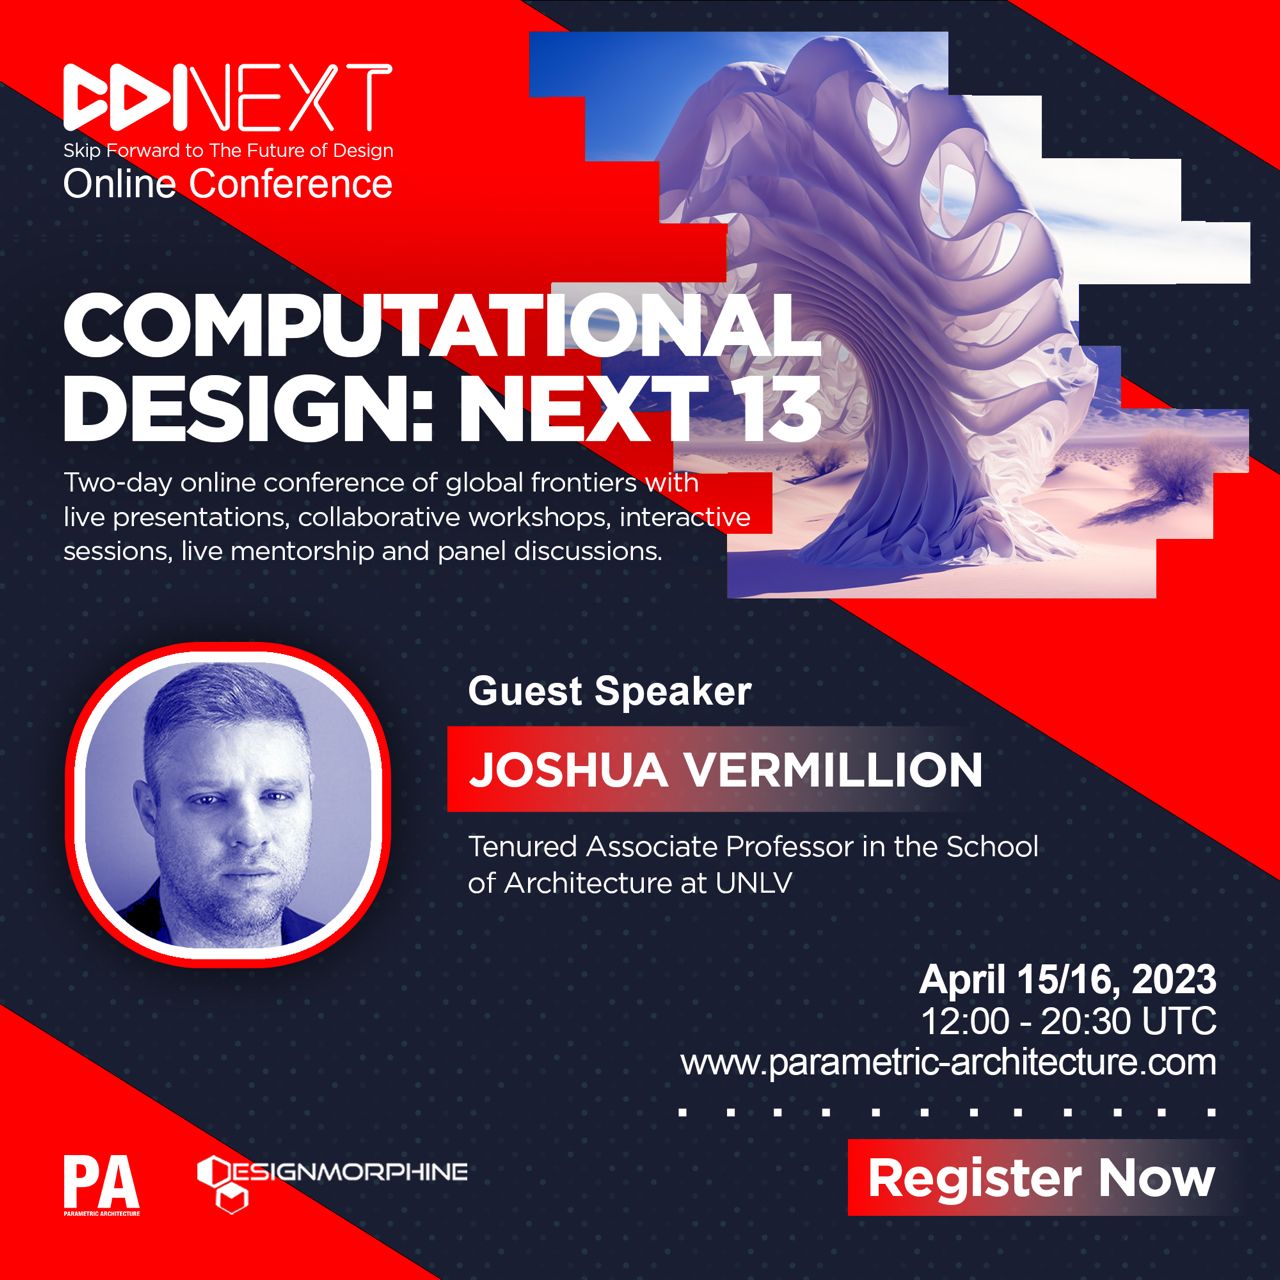 Guest Speaker at Computational Design: NEXY 13 Conference